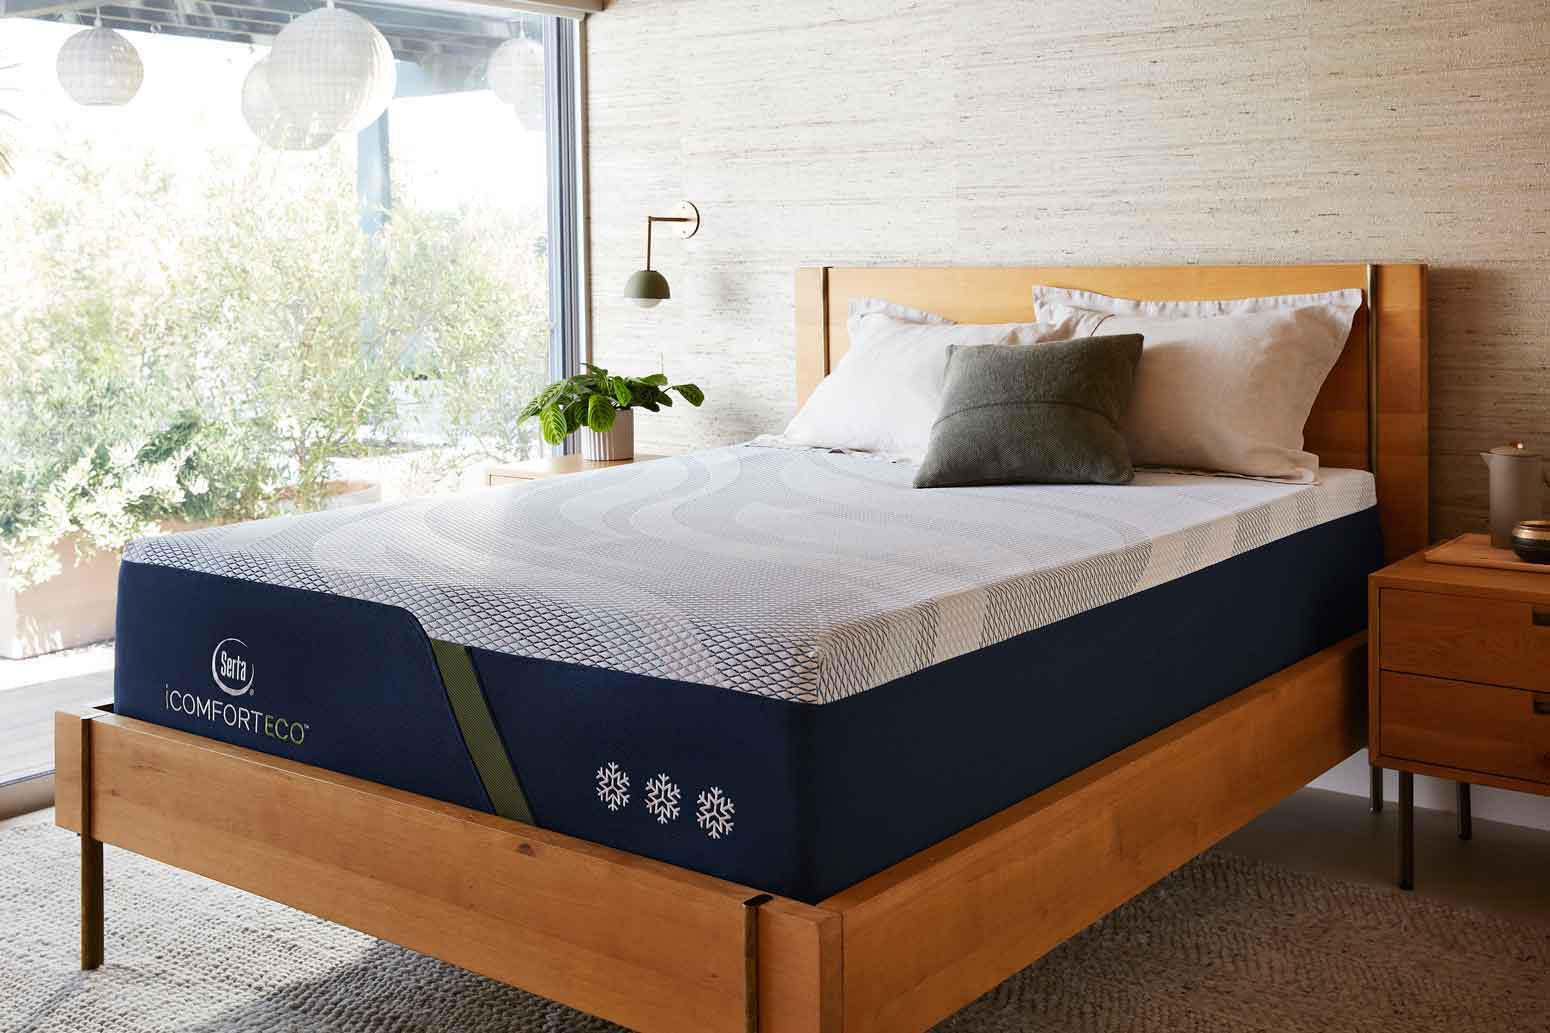 What You Need To Know About The Serta iComfort ECO Mattress